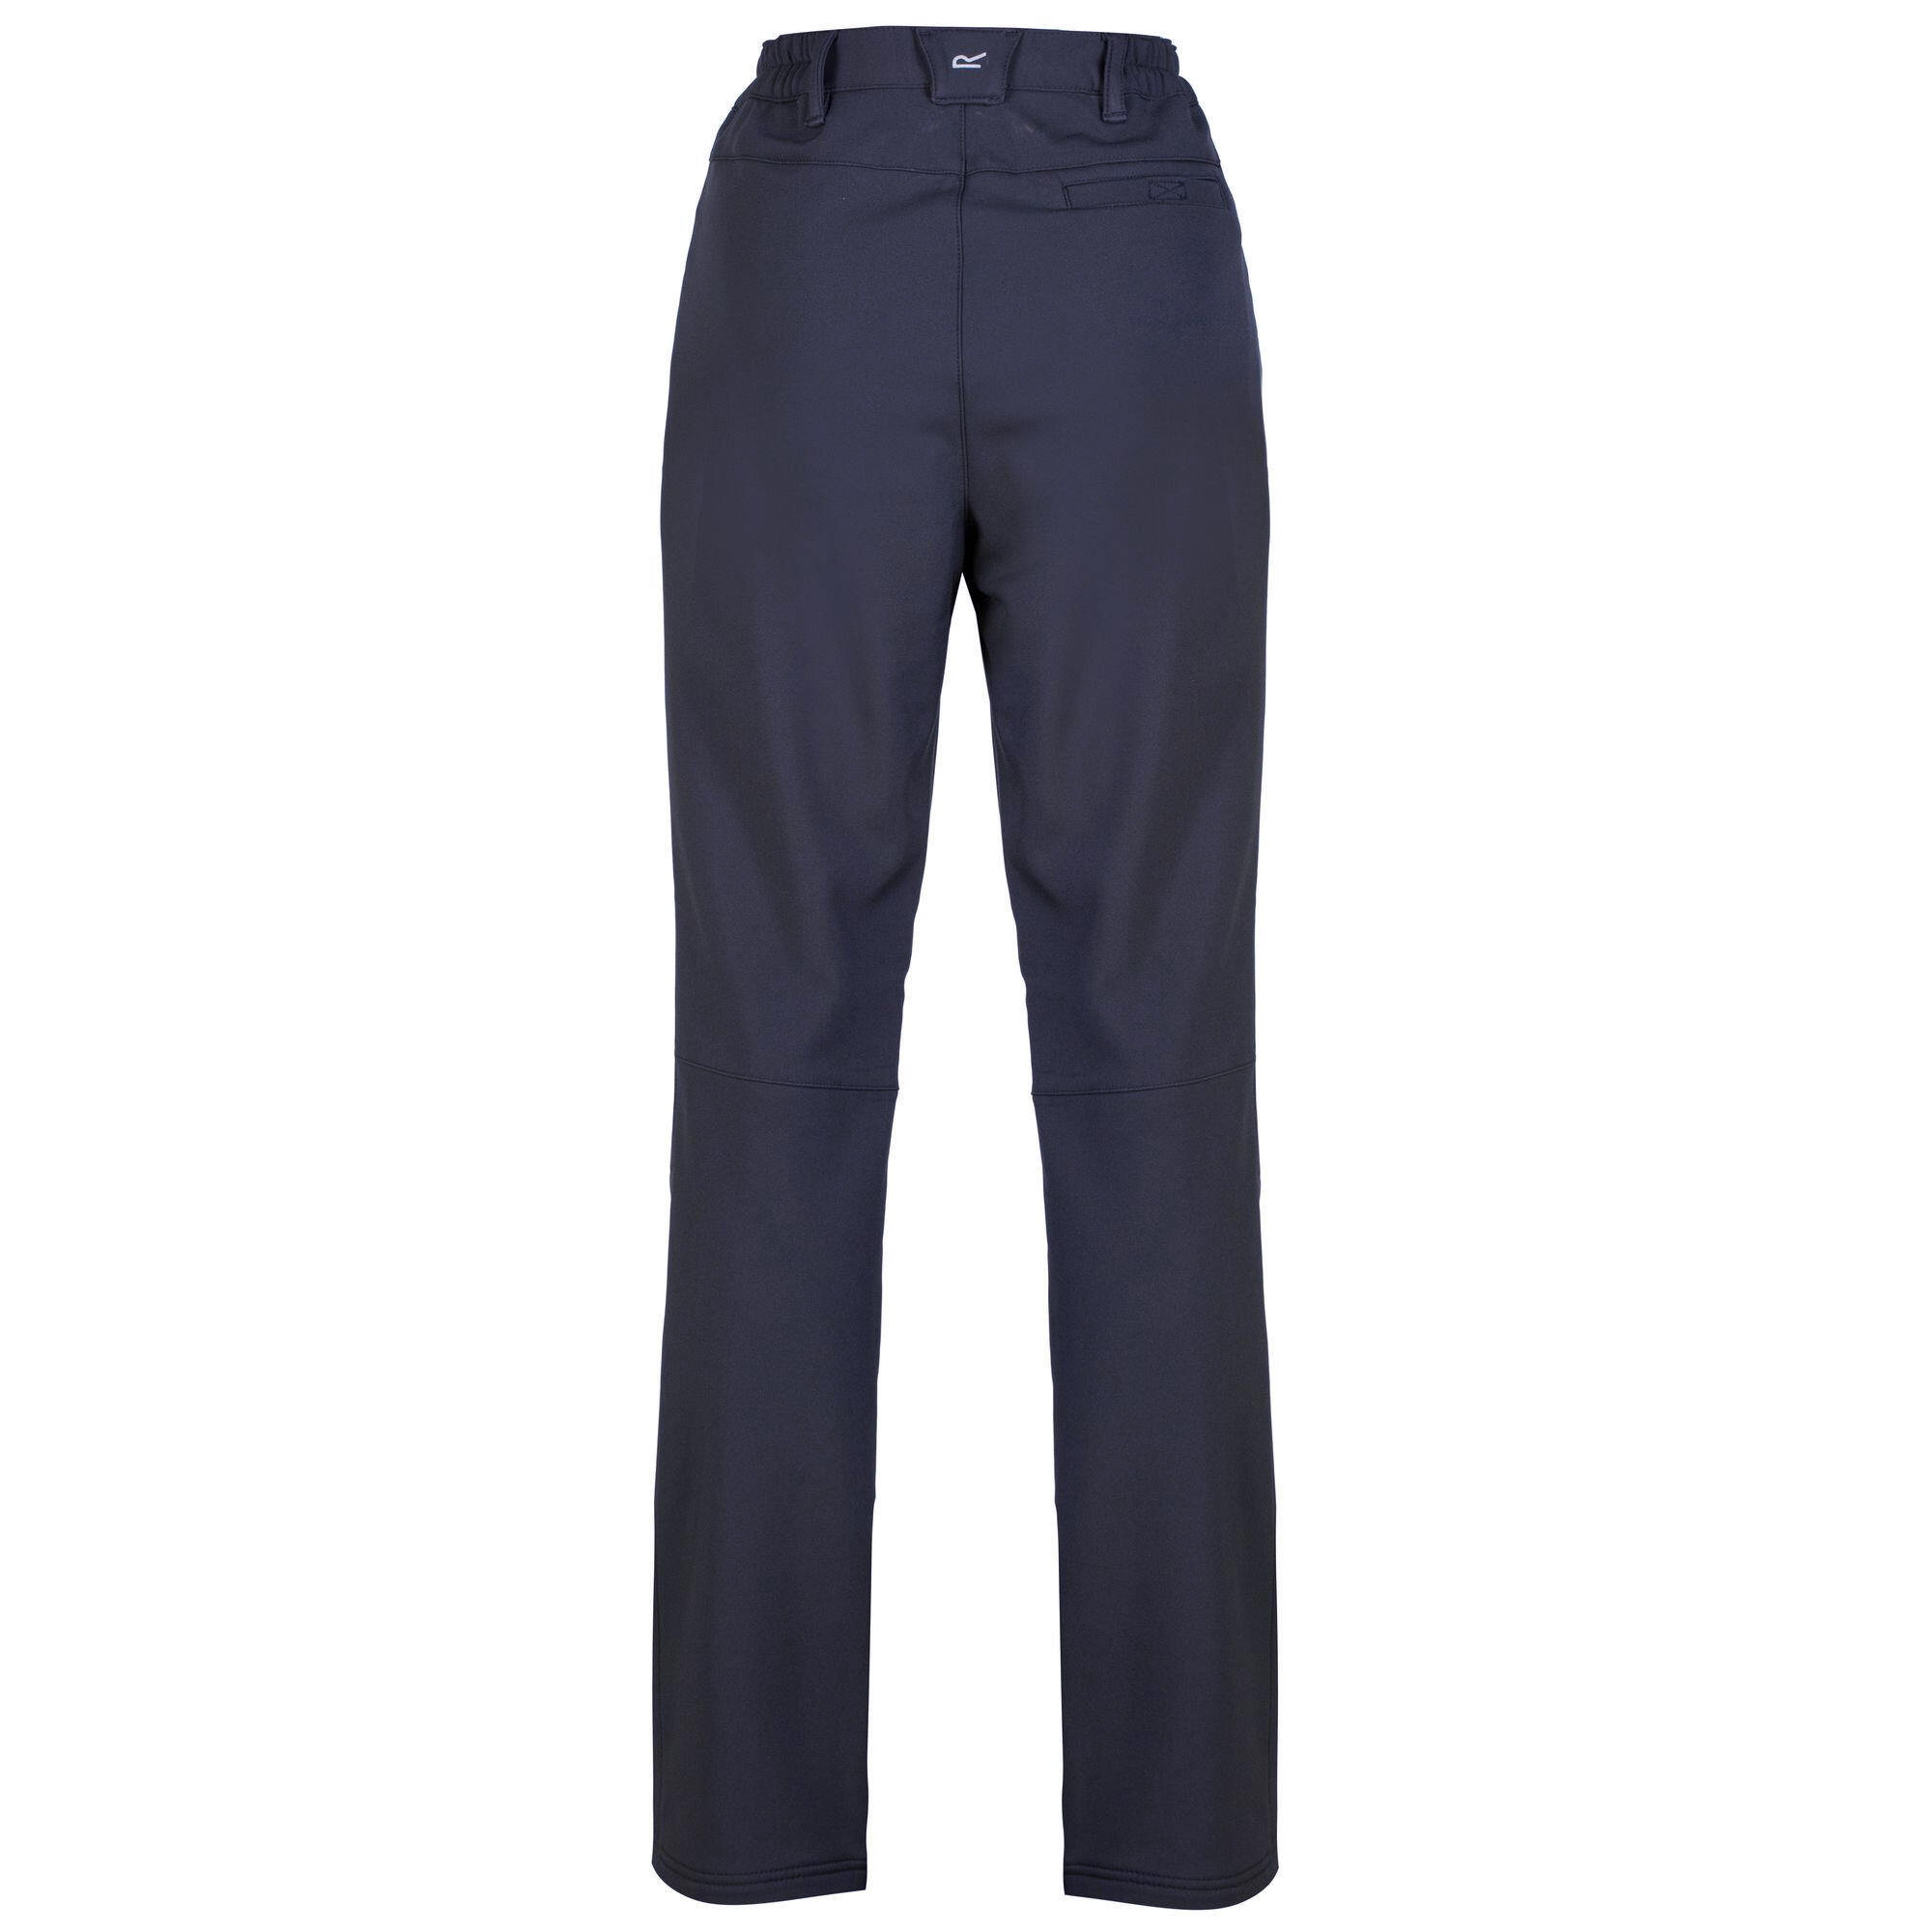 Great Outdoors Womens/Ladies Fenton Softshell Walking Trousers (Navy) 2/5